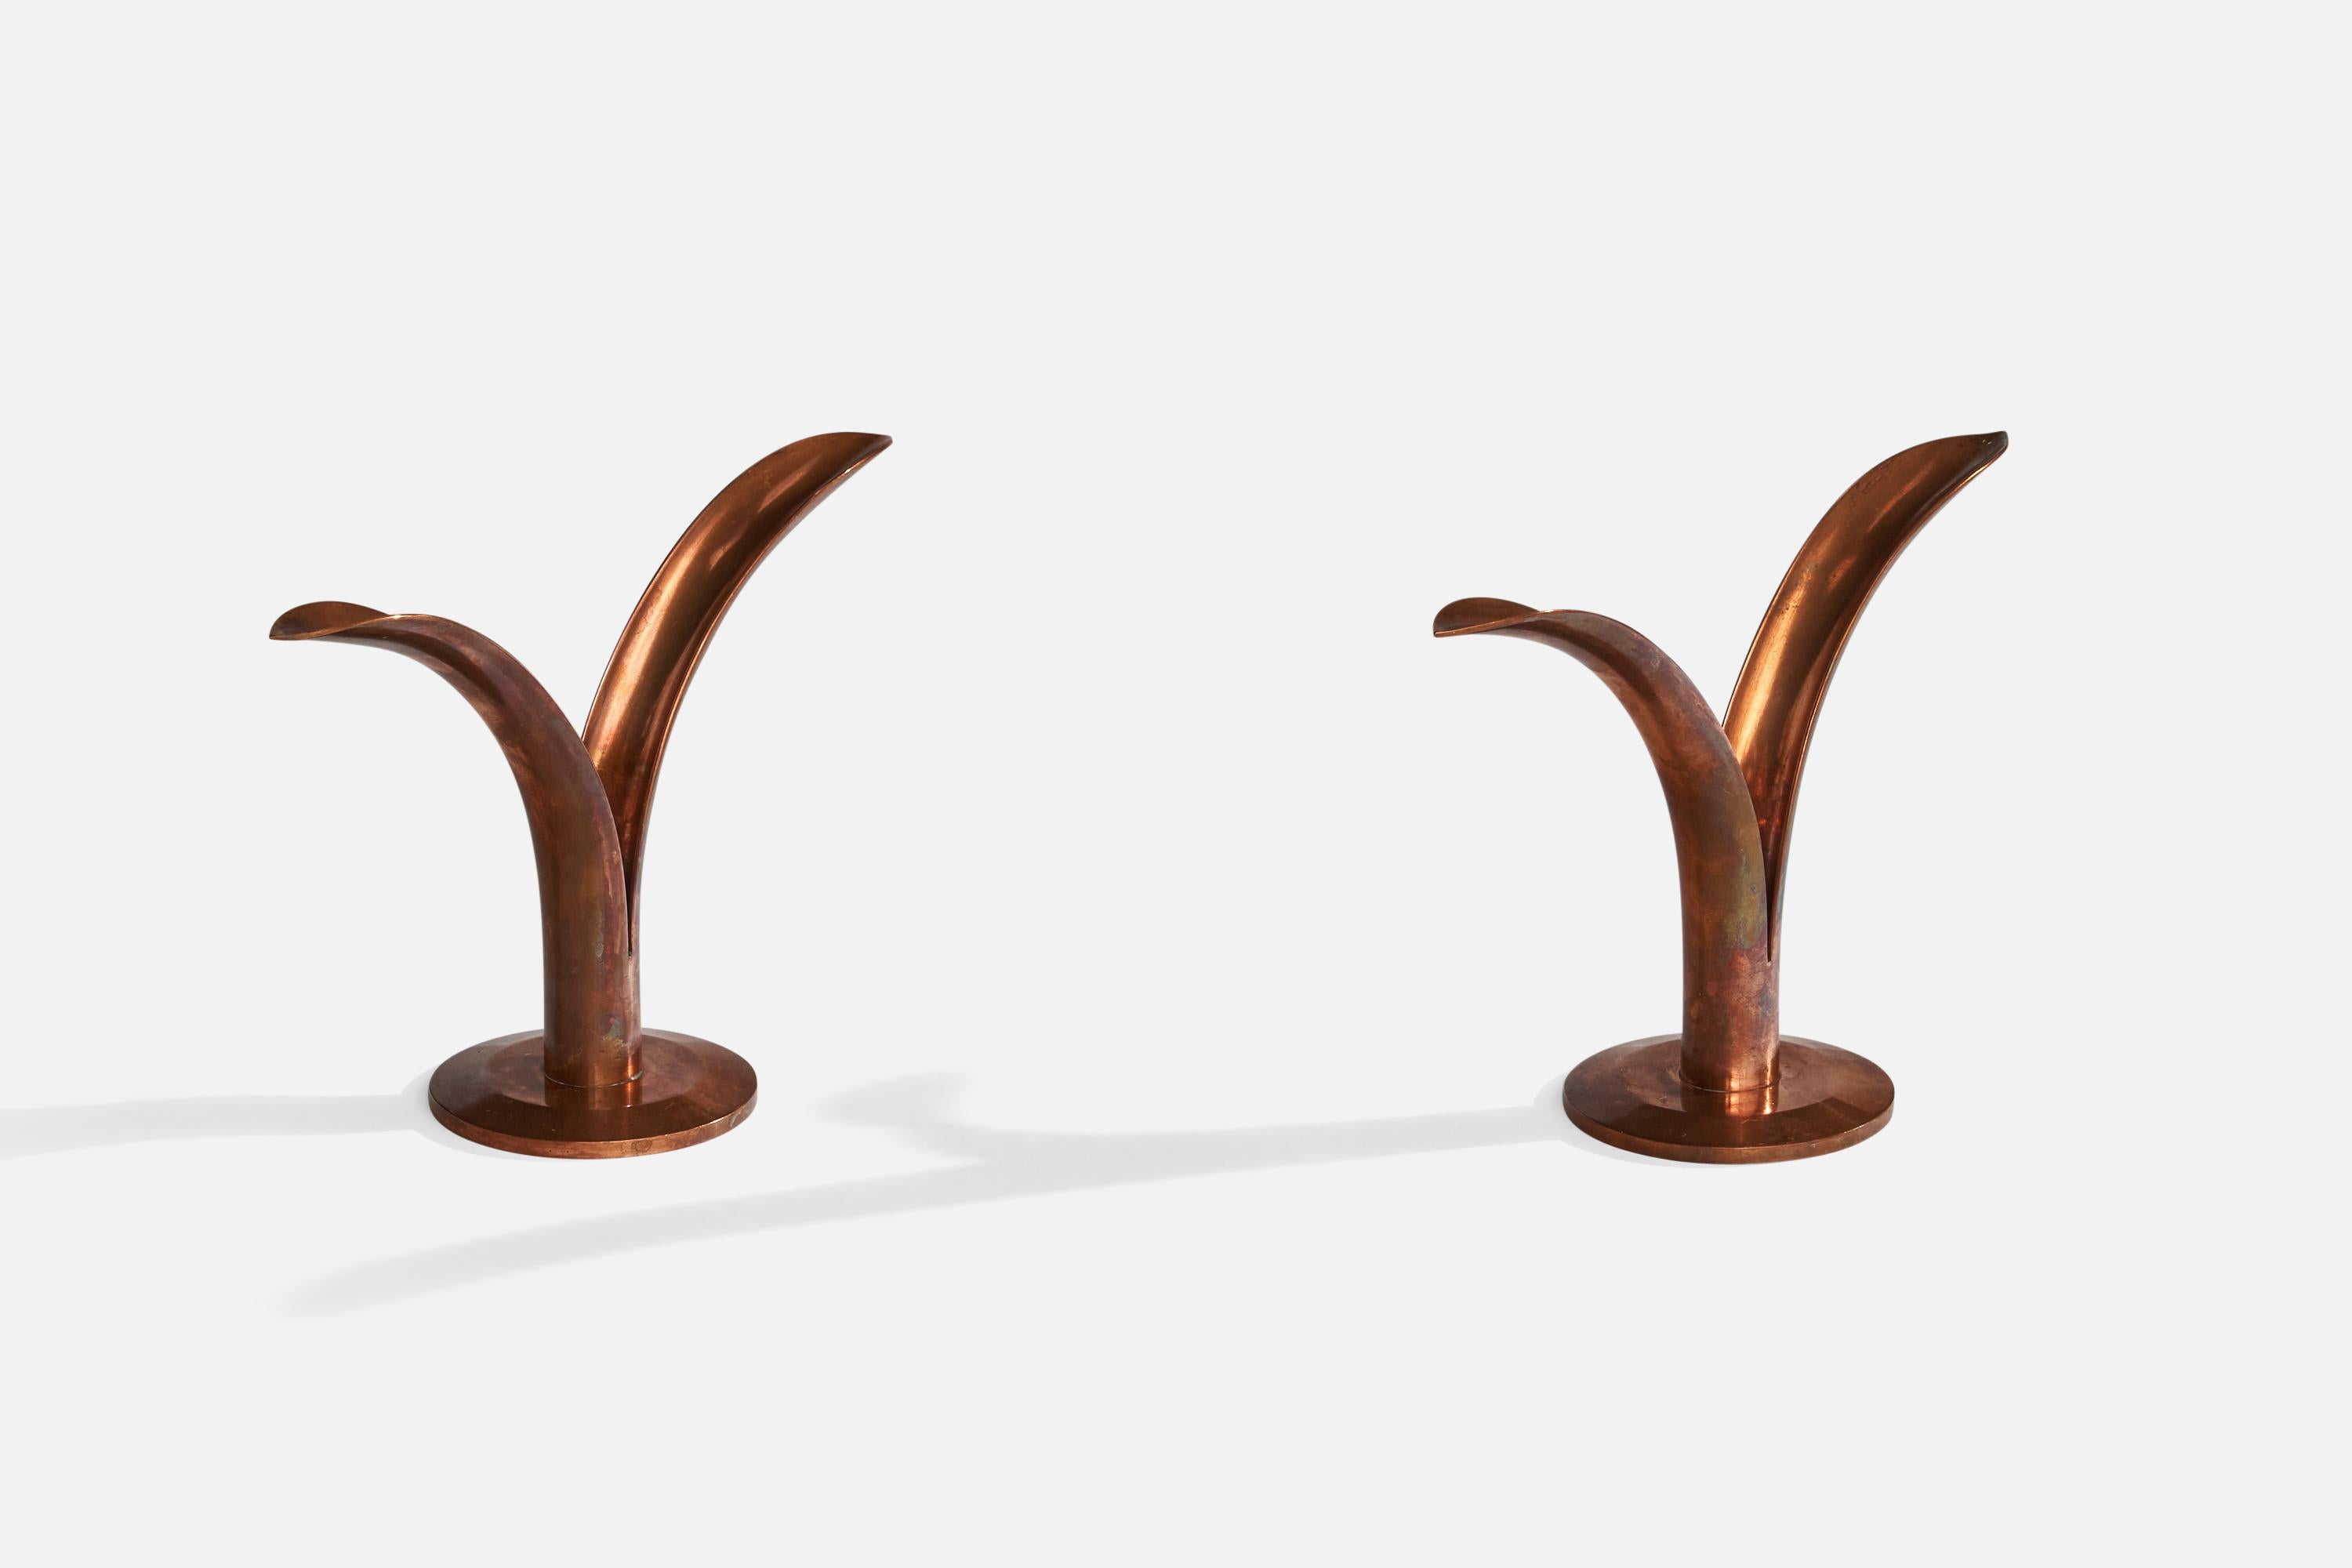 A pair copper candlesticks designed and produced in Sweden, c. 1950s.

Holds 0.8” diameter candles